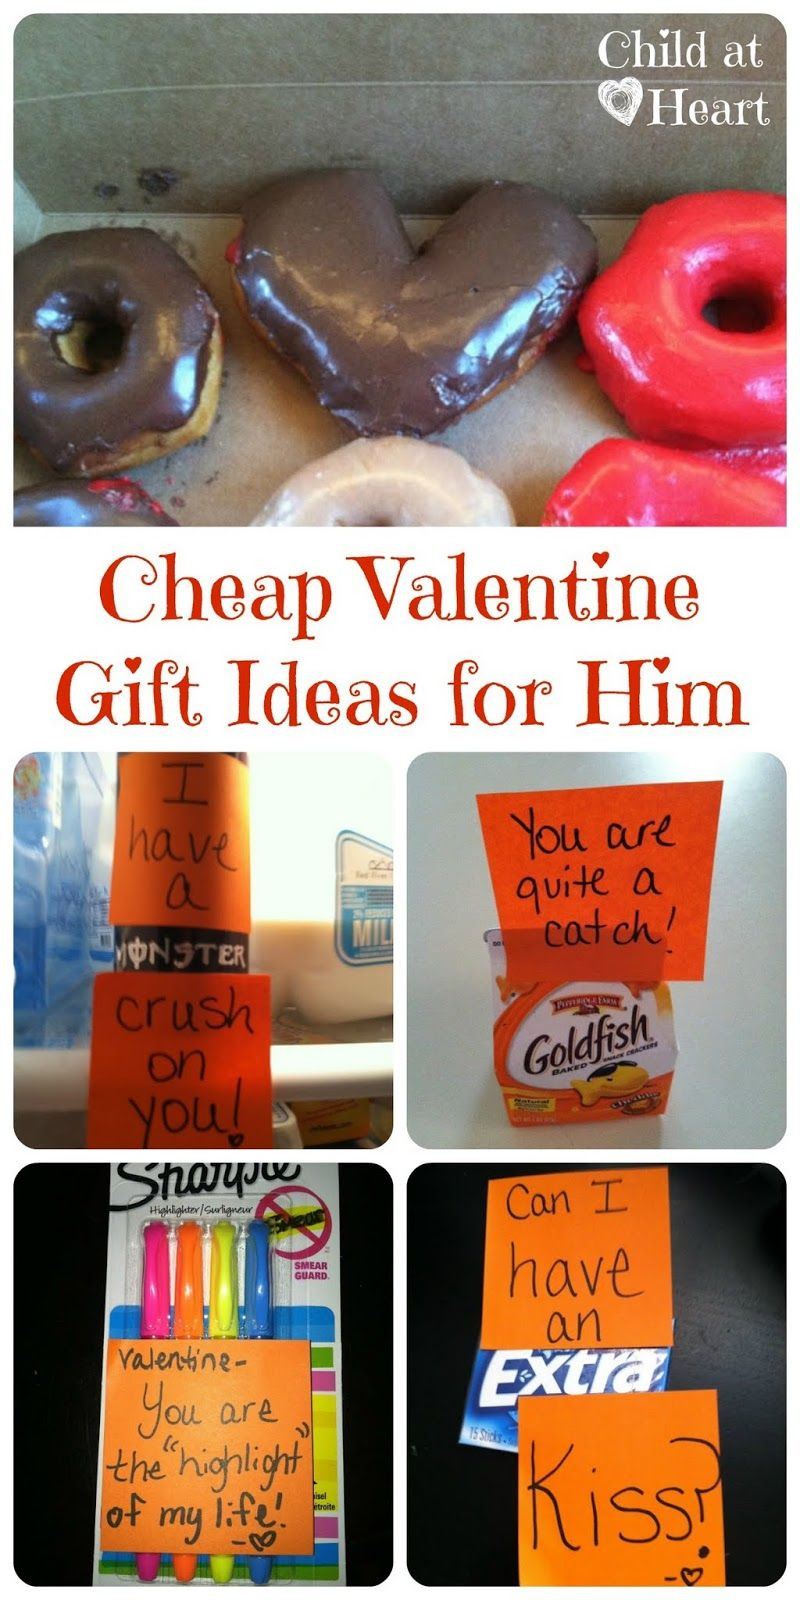 Inexpensive Gift Ideas For Boyfriend
 Cheap Valentine Gift Ideas for Him